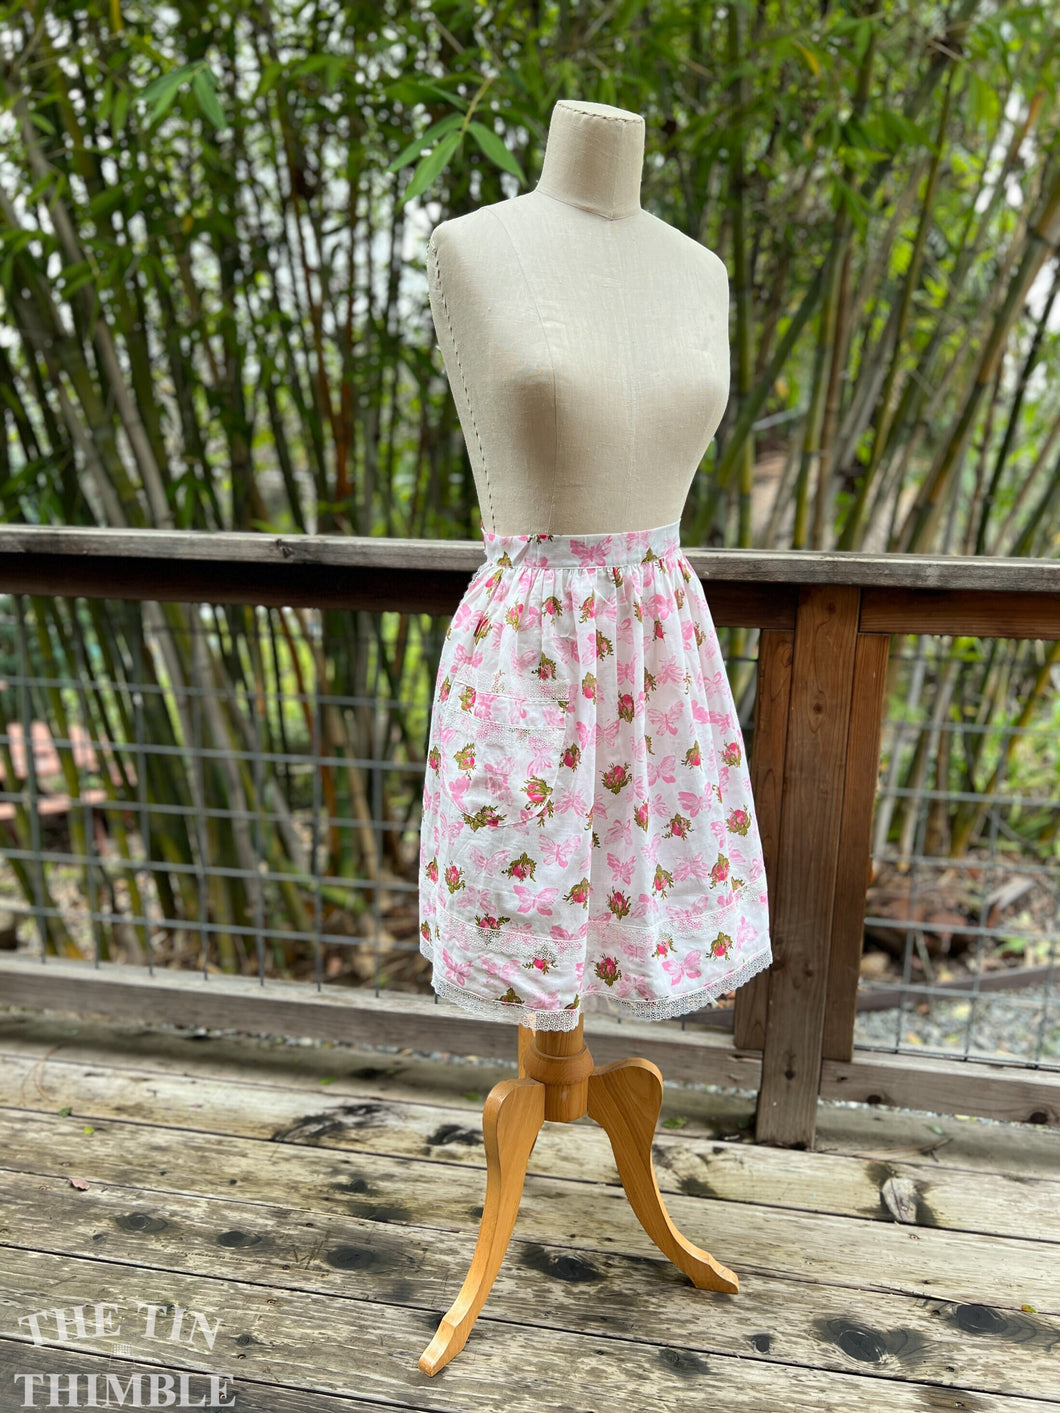 Vintage Handmade Half Apron - Lightweight Floral and Lace Pink and White 1950s Hostess Apron